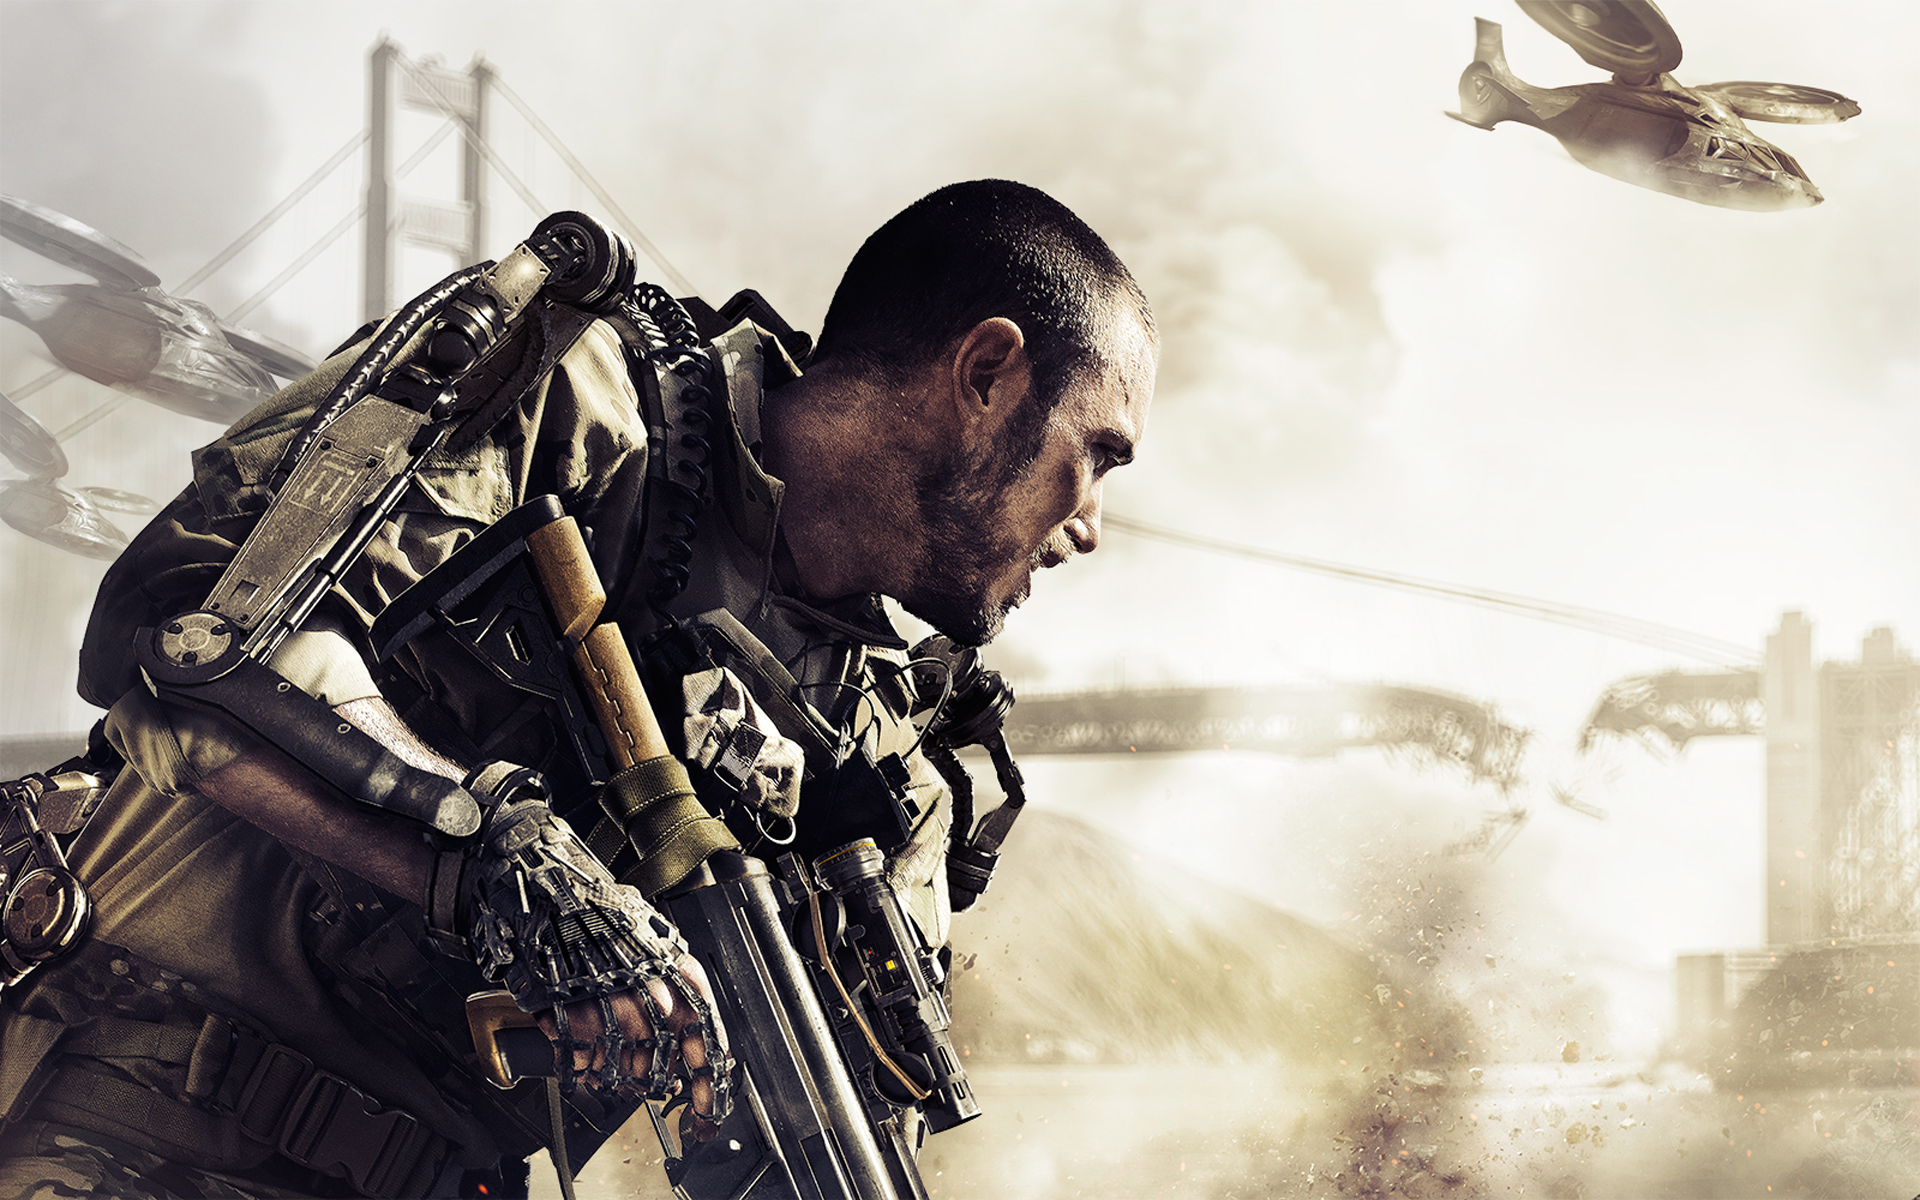 Call of duty: advanced warfare multiplayer reveal and opinions